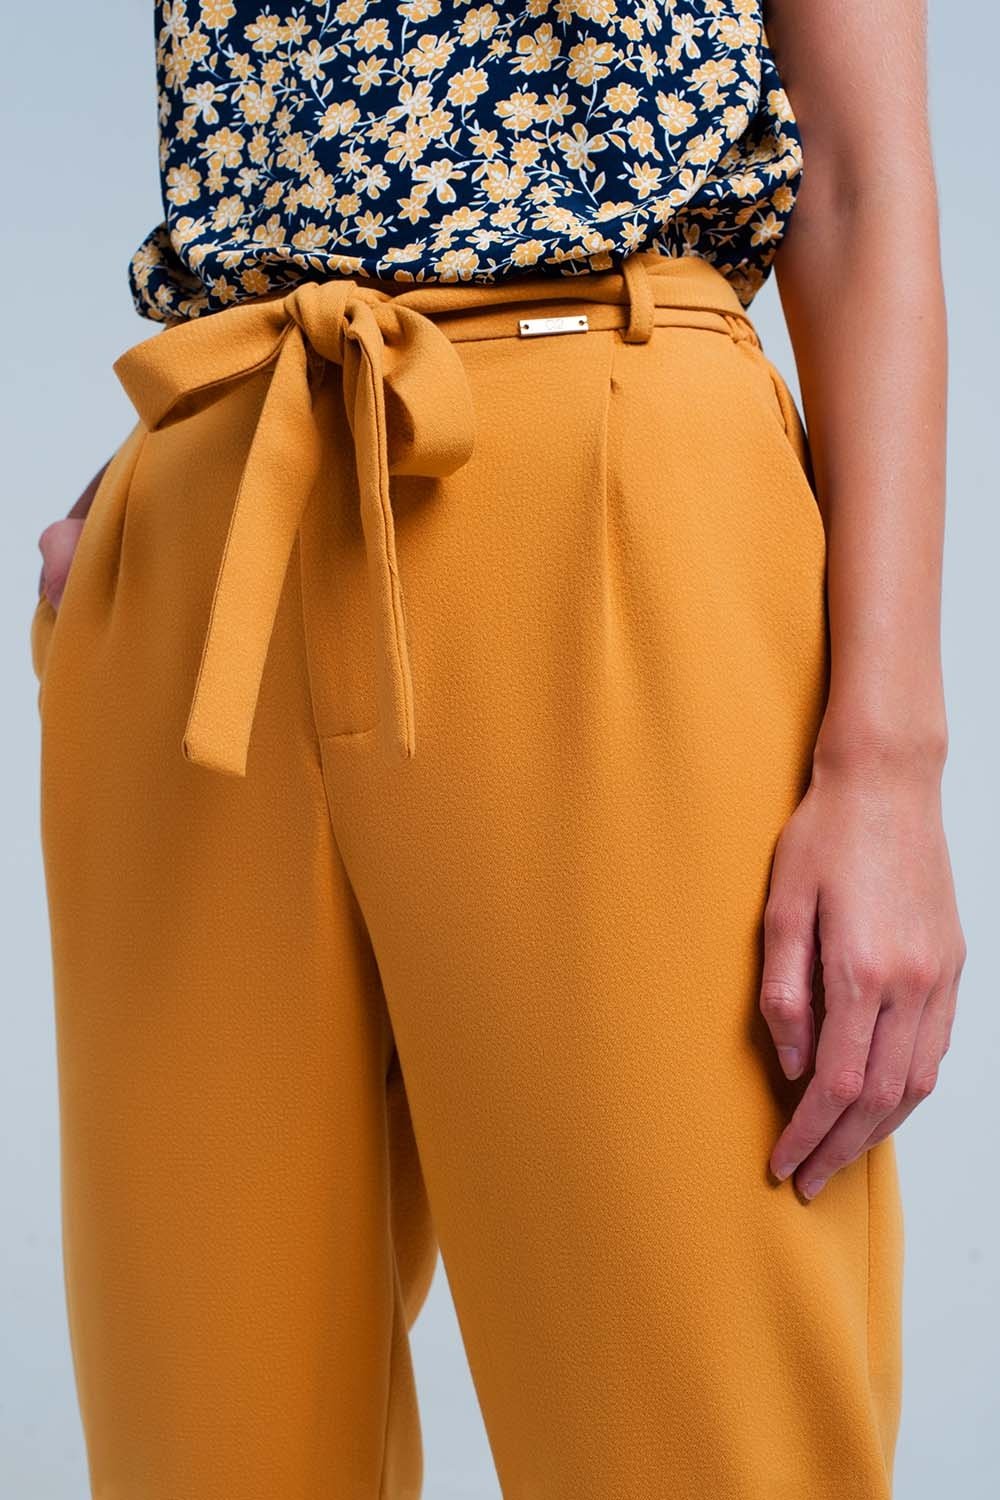 Zara high waisted belted yellow pants